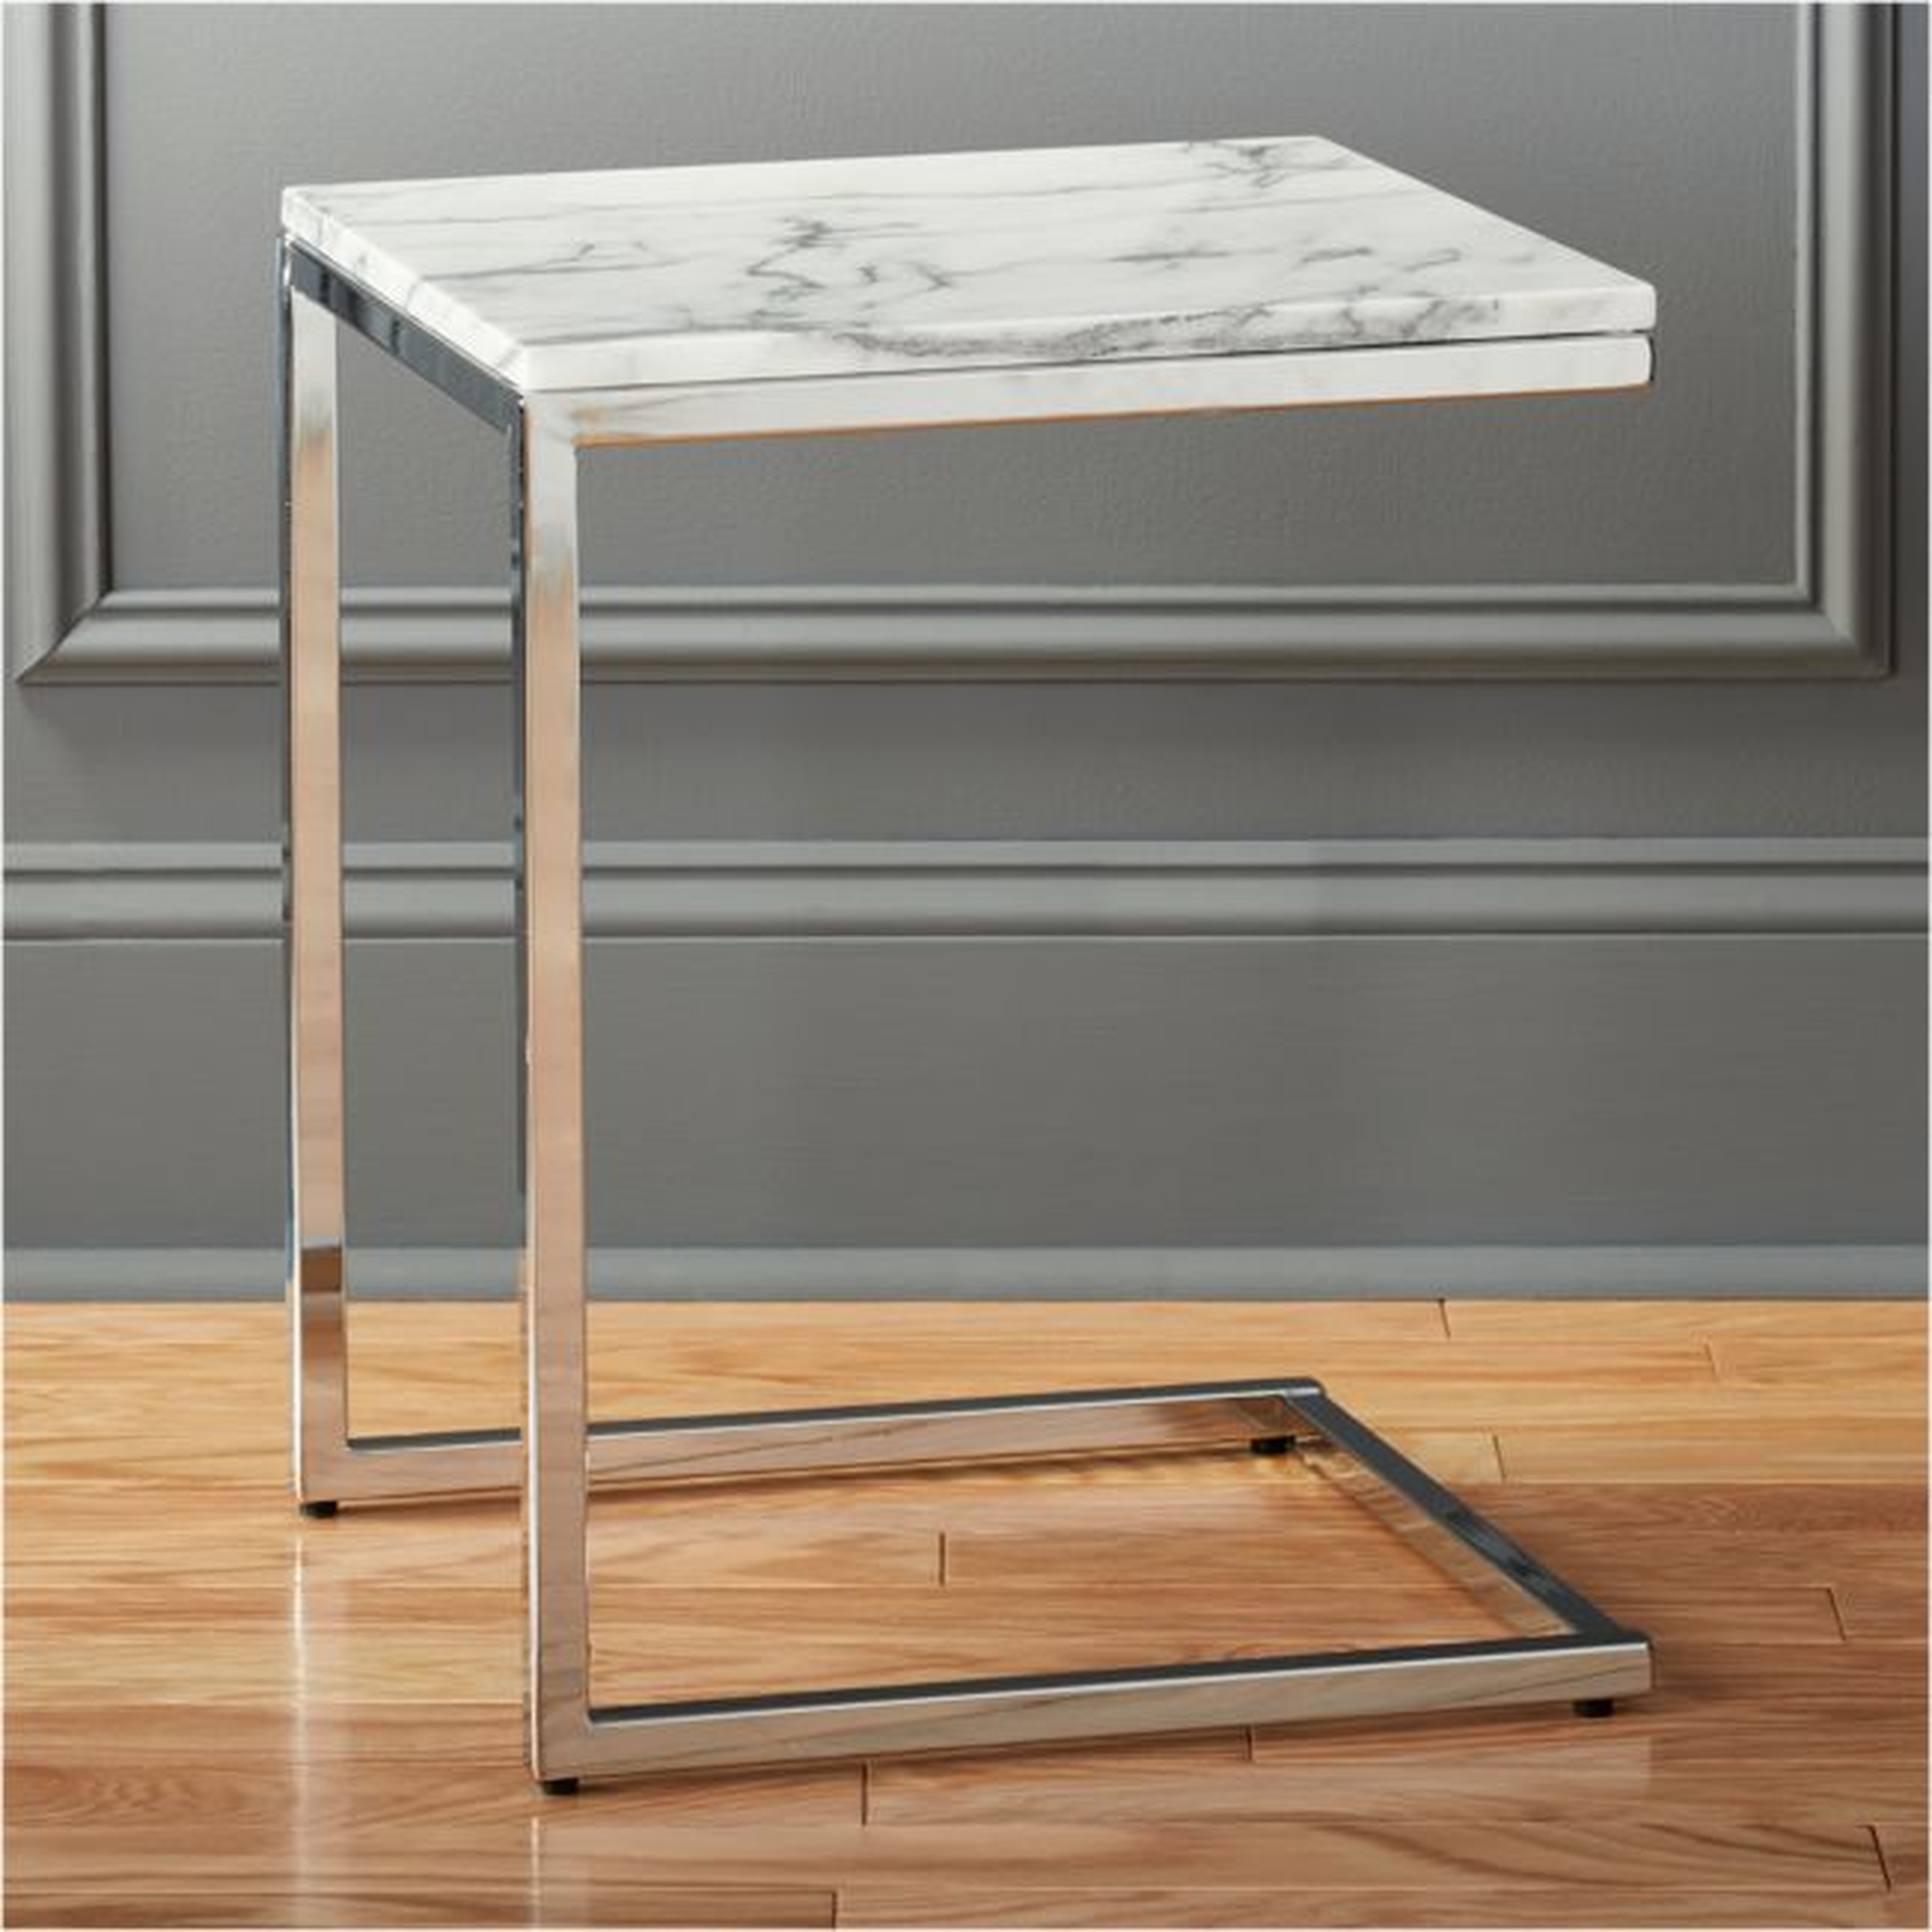 Smart Chrome C Table with White Marble Top - CB2